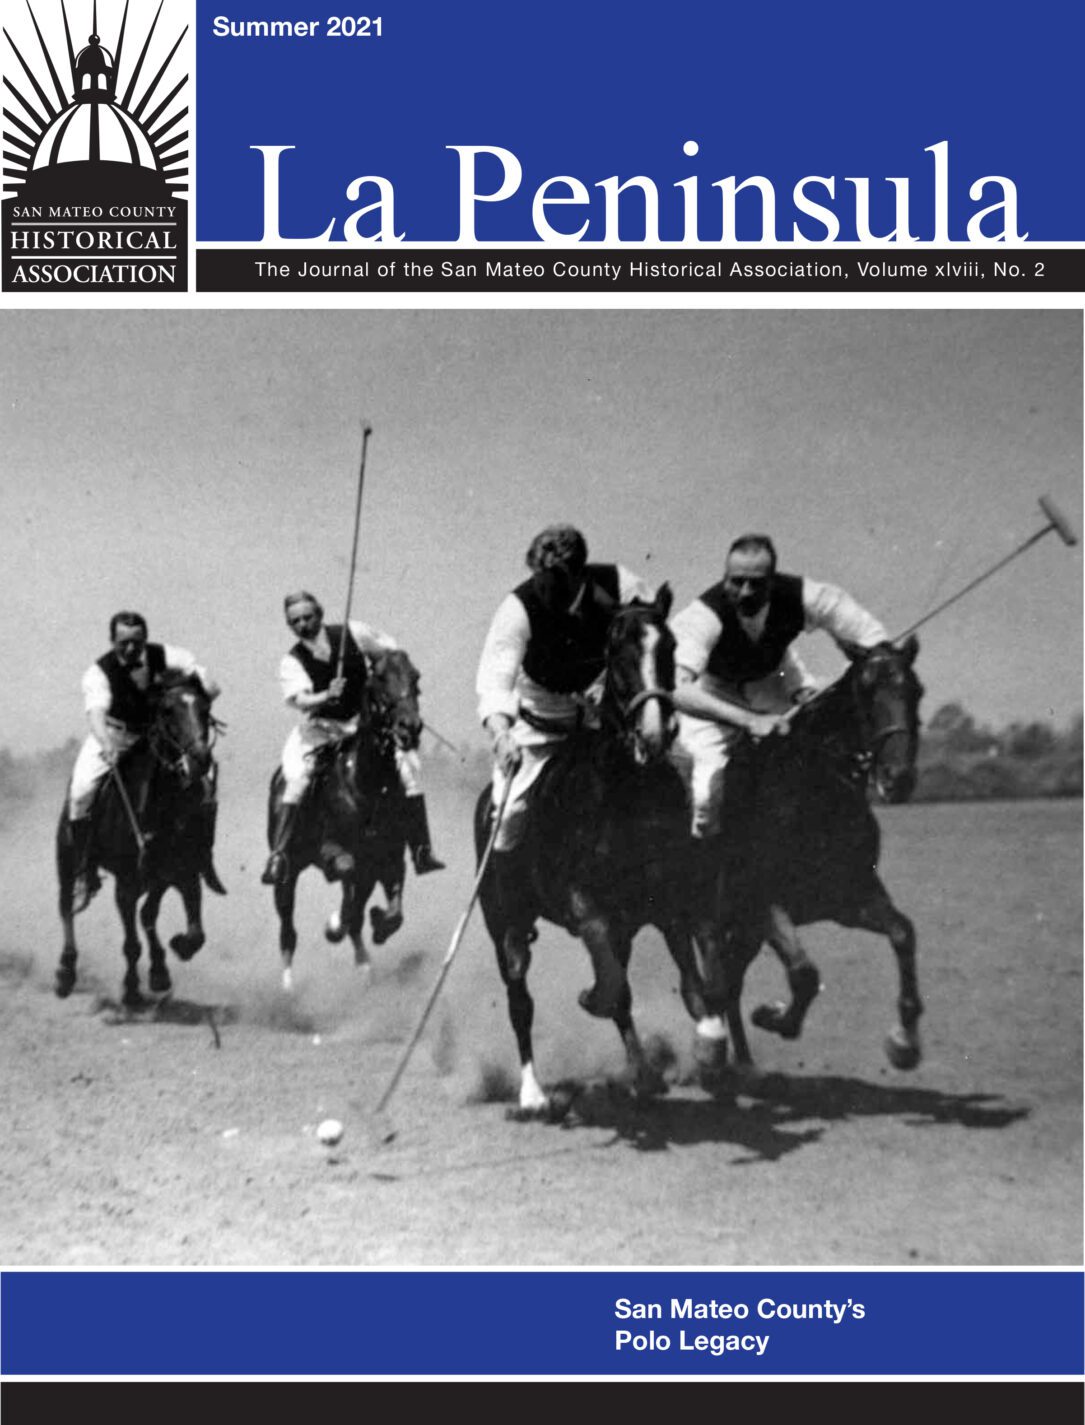 Front cover of La Peninsula showing four men on horseback playing polo